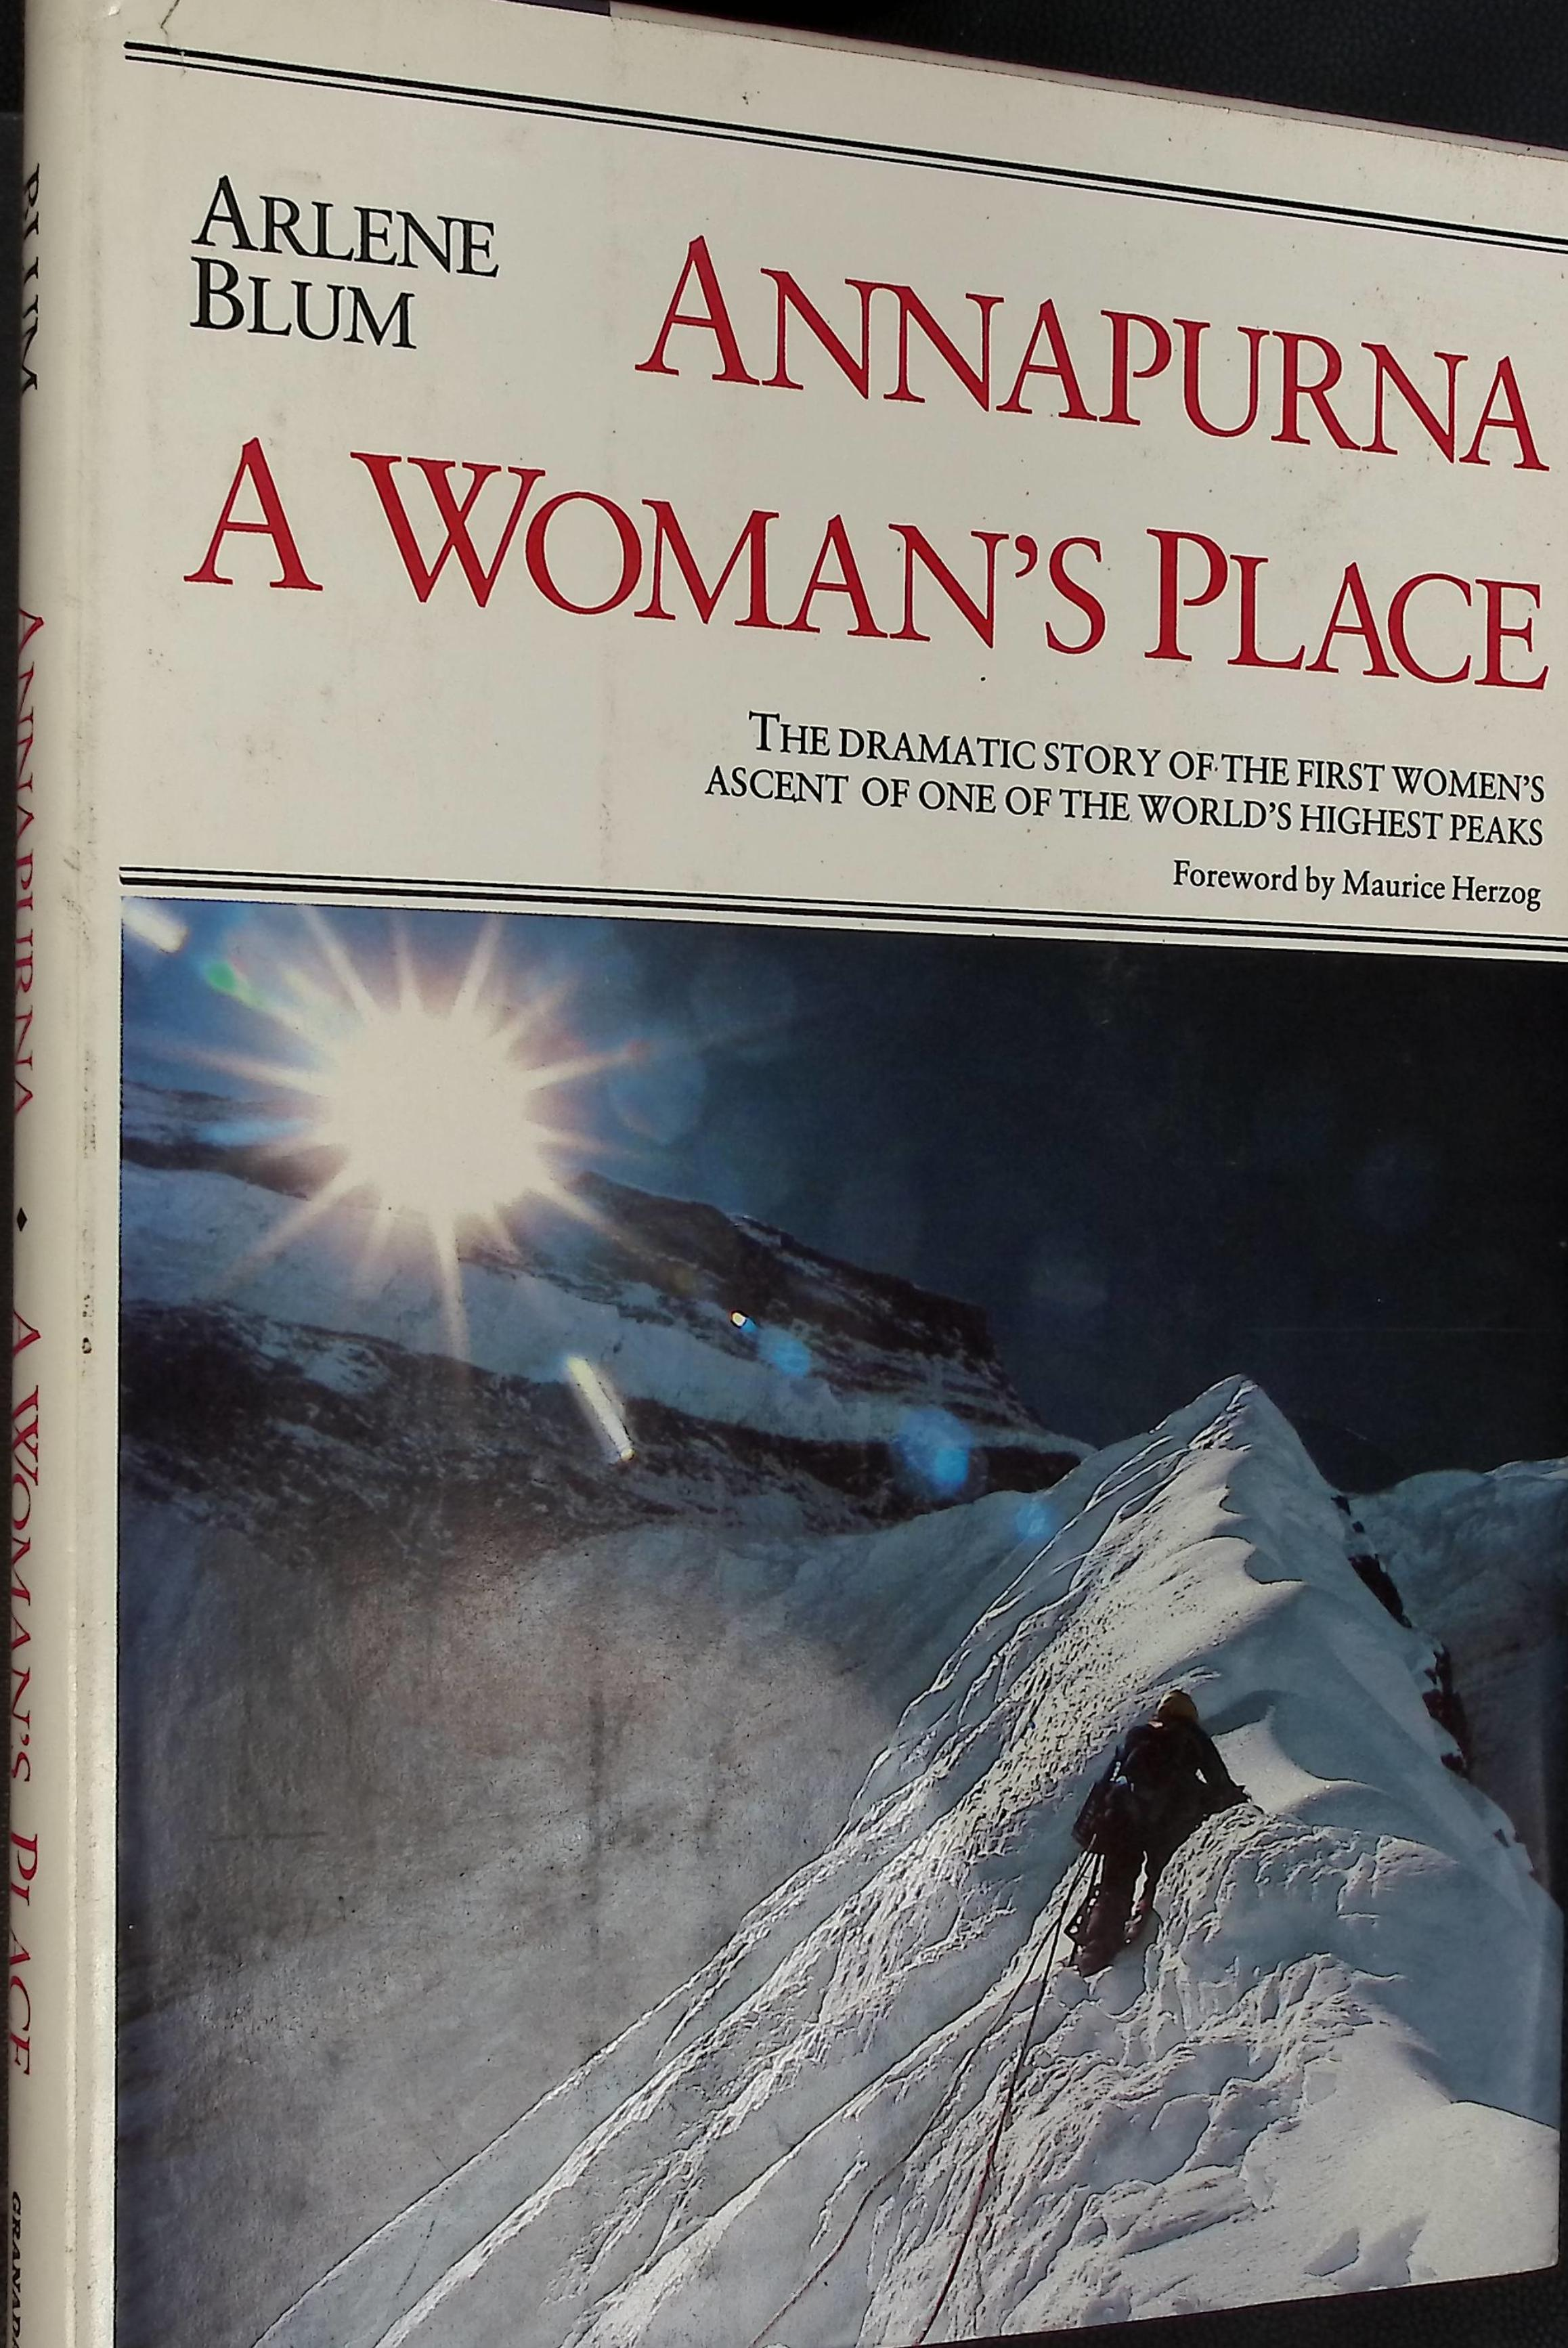 Annapurna A Woman's Place. The Dramatic Story of the First Women's Ascent of One of the World's Highest Peaks. Signed copy.